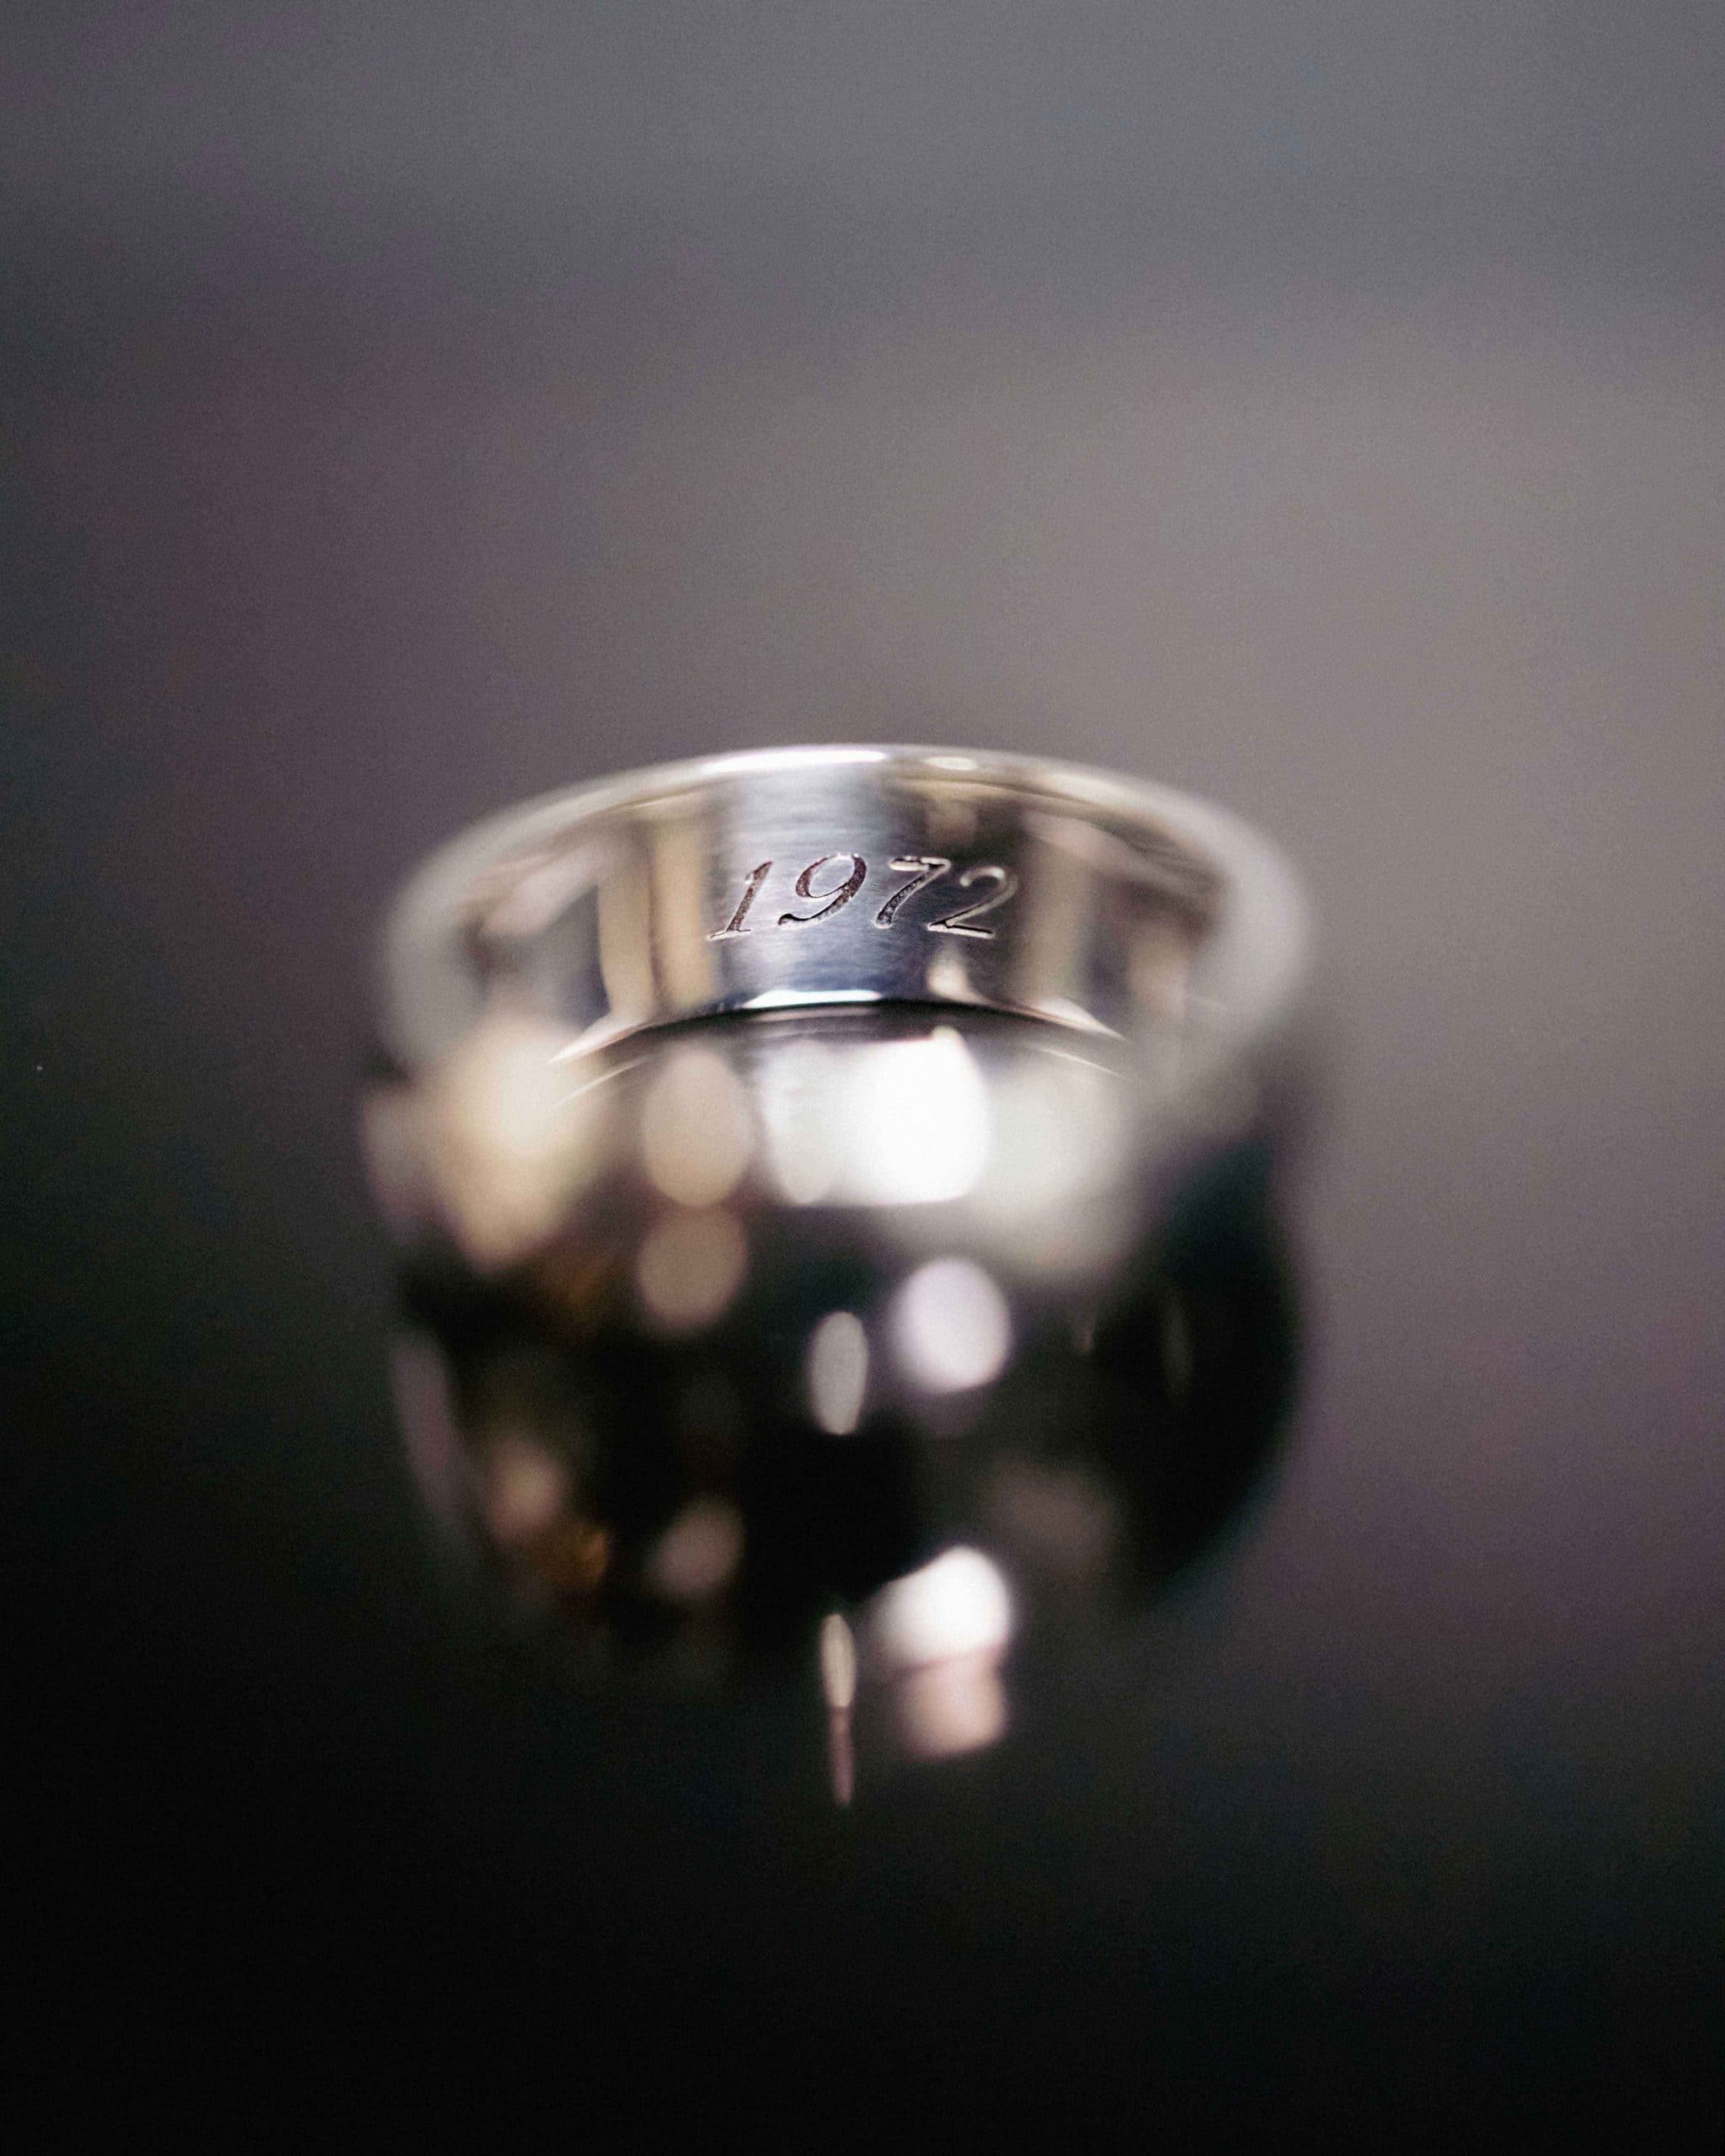 Personal engraving - priced per letter | Wedding band engraving, Engraved  wedding rings, Wedding rings sets his and hers